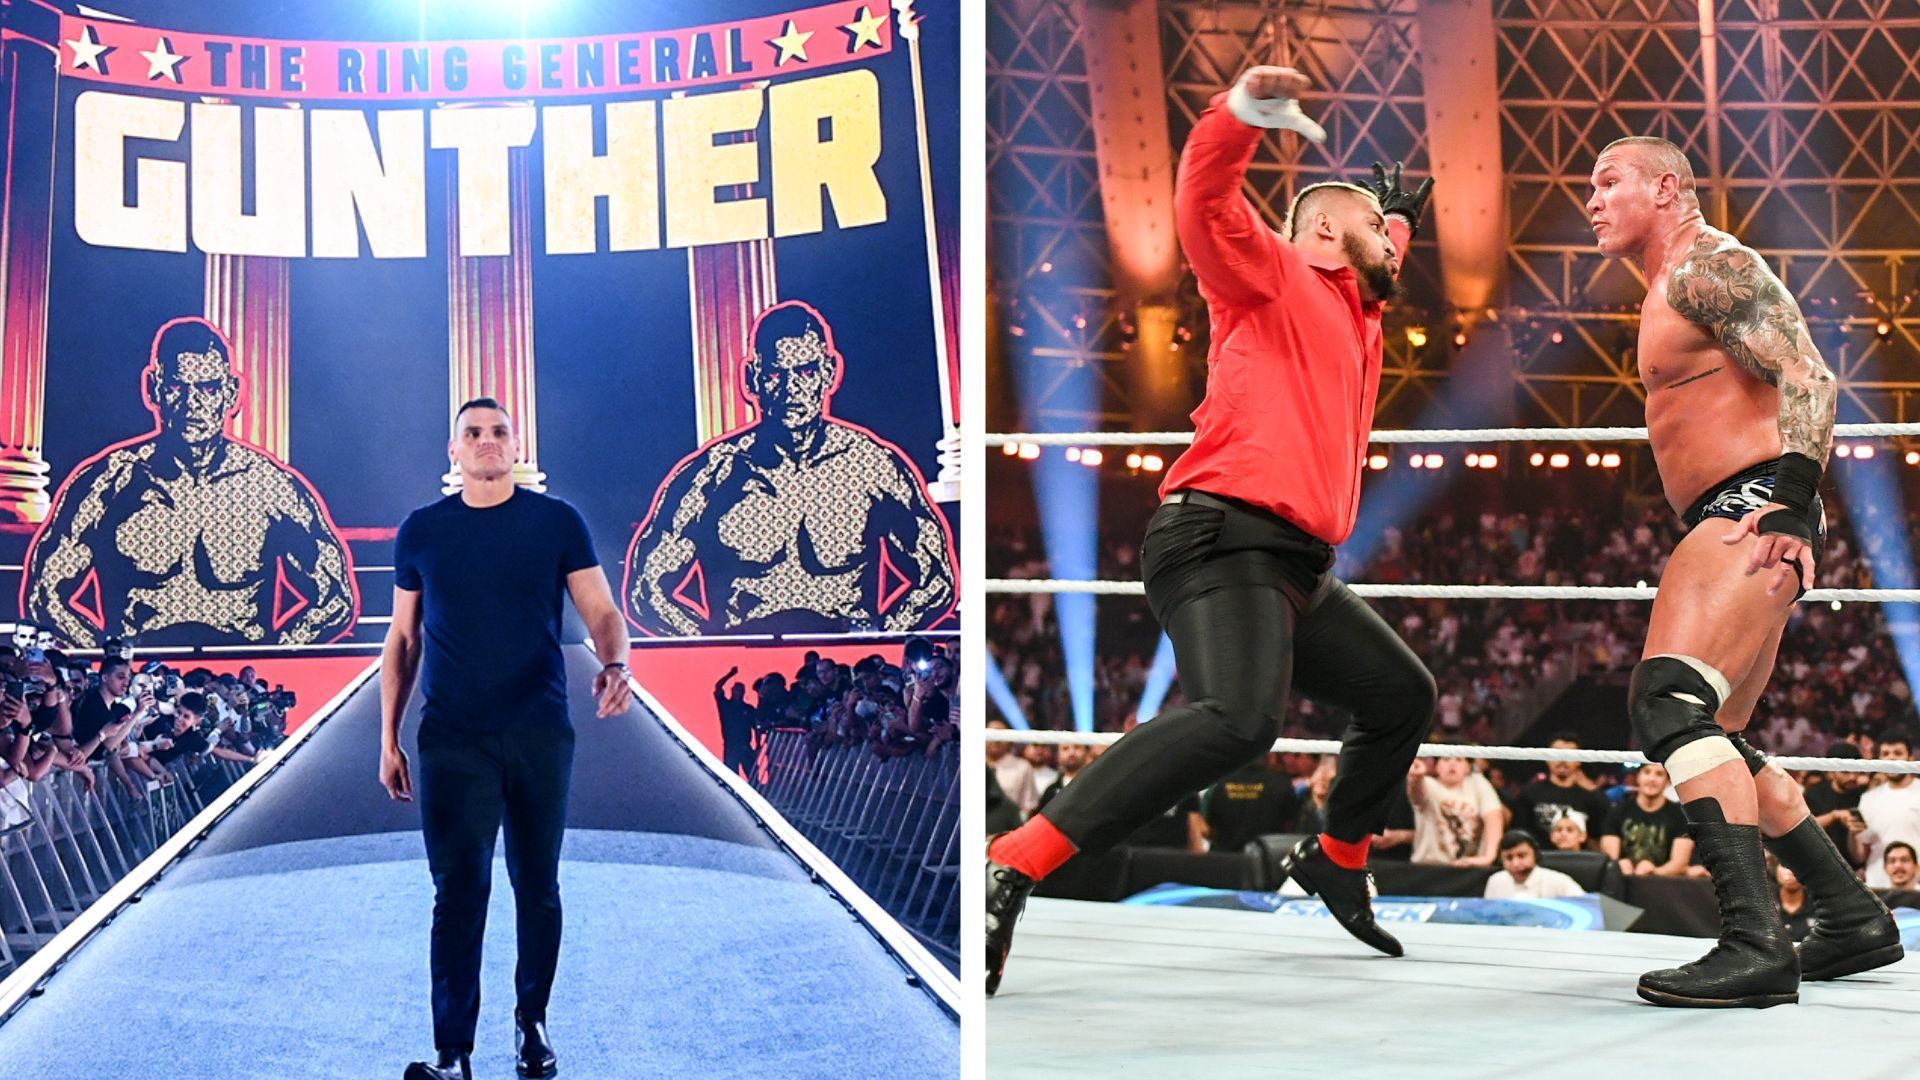 The Bloodline may try to interfere in the WWE King of the Ring finals